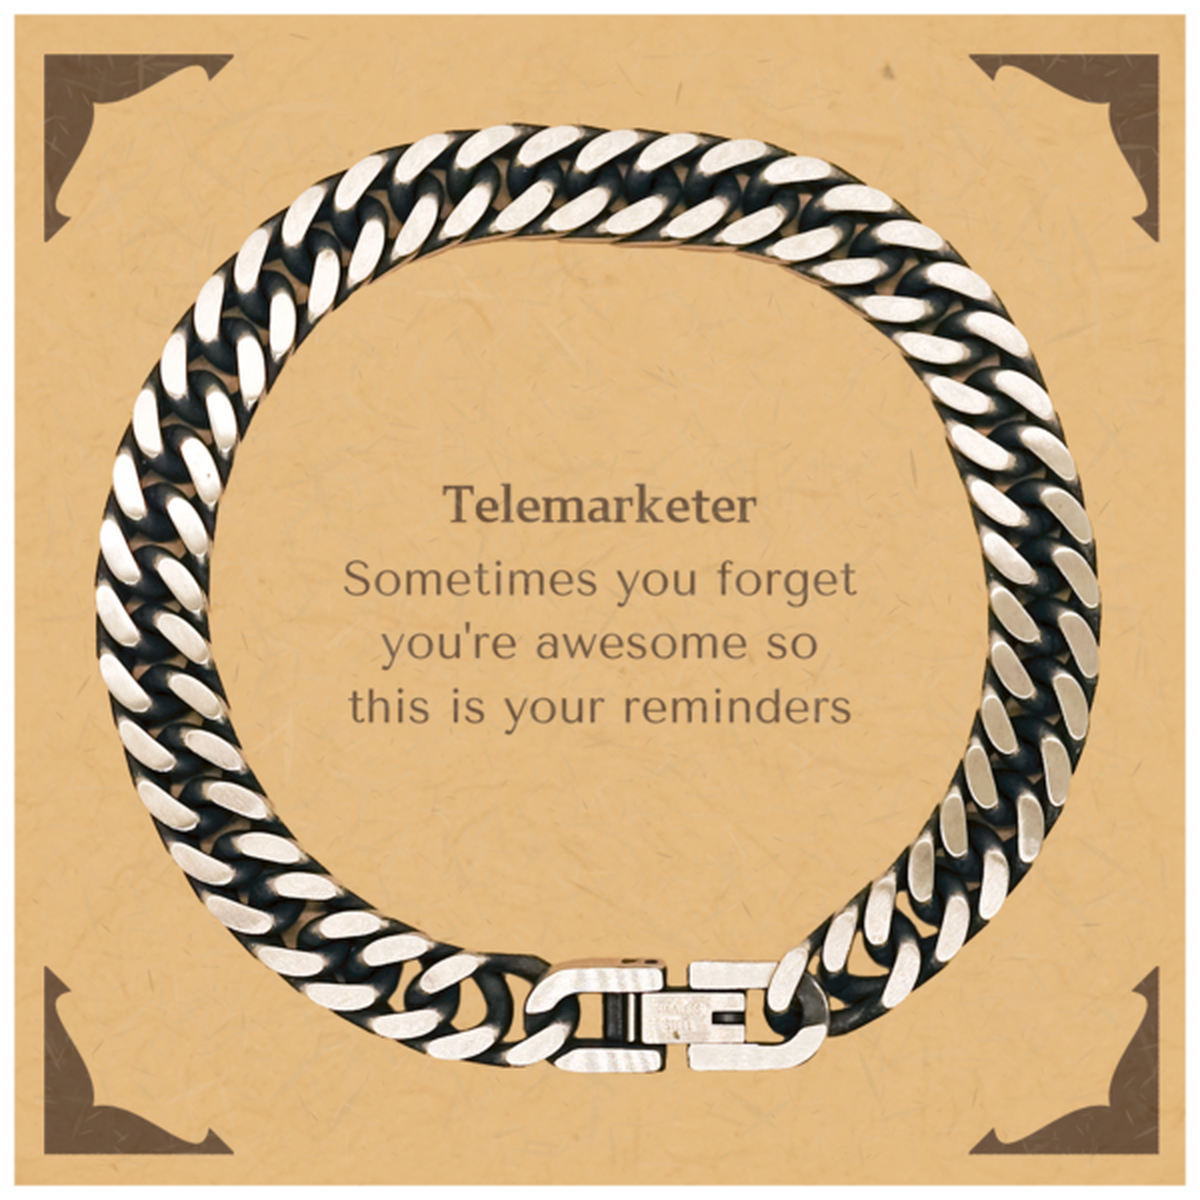 Sentimental Telemarketer Cuban Link Chain Bracelet, Telemarketer Sometimes you forget you're awesome so this is your reminders, Graduation Christmas Birthday Gifts for Telemarketer, Men, Women, Coworkers